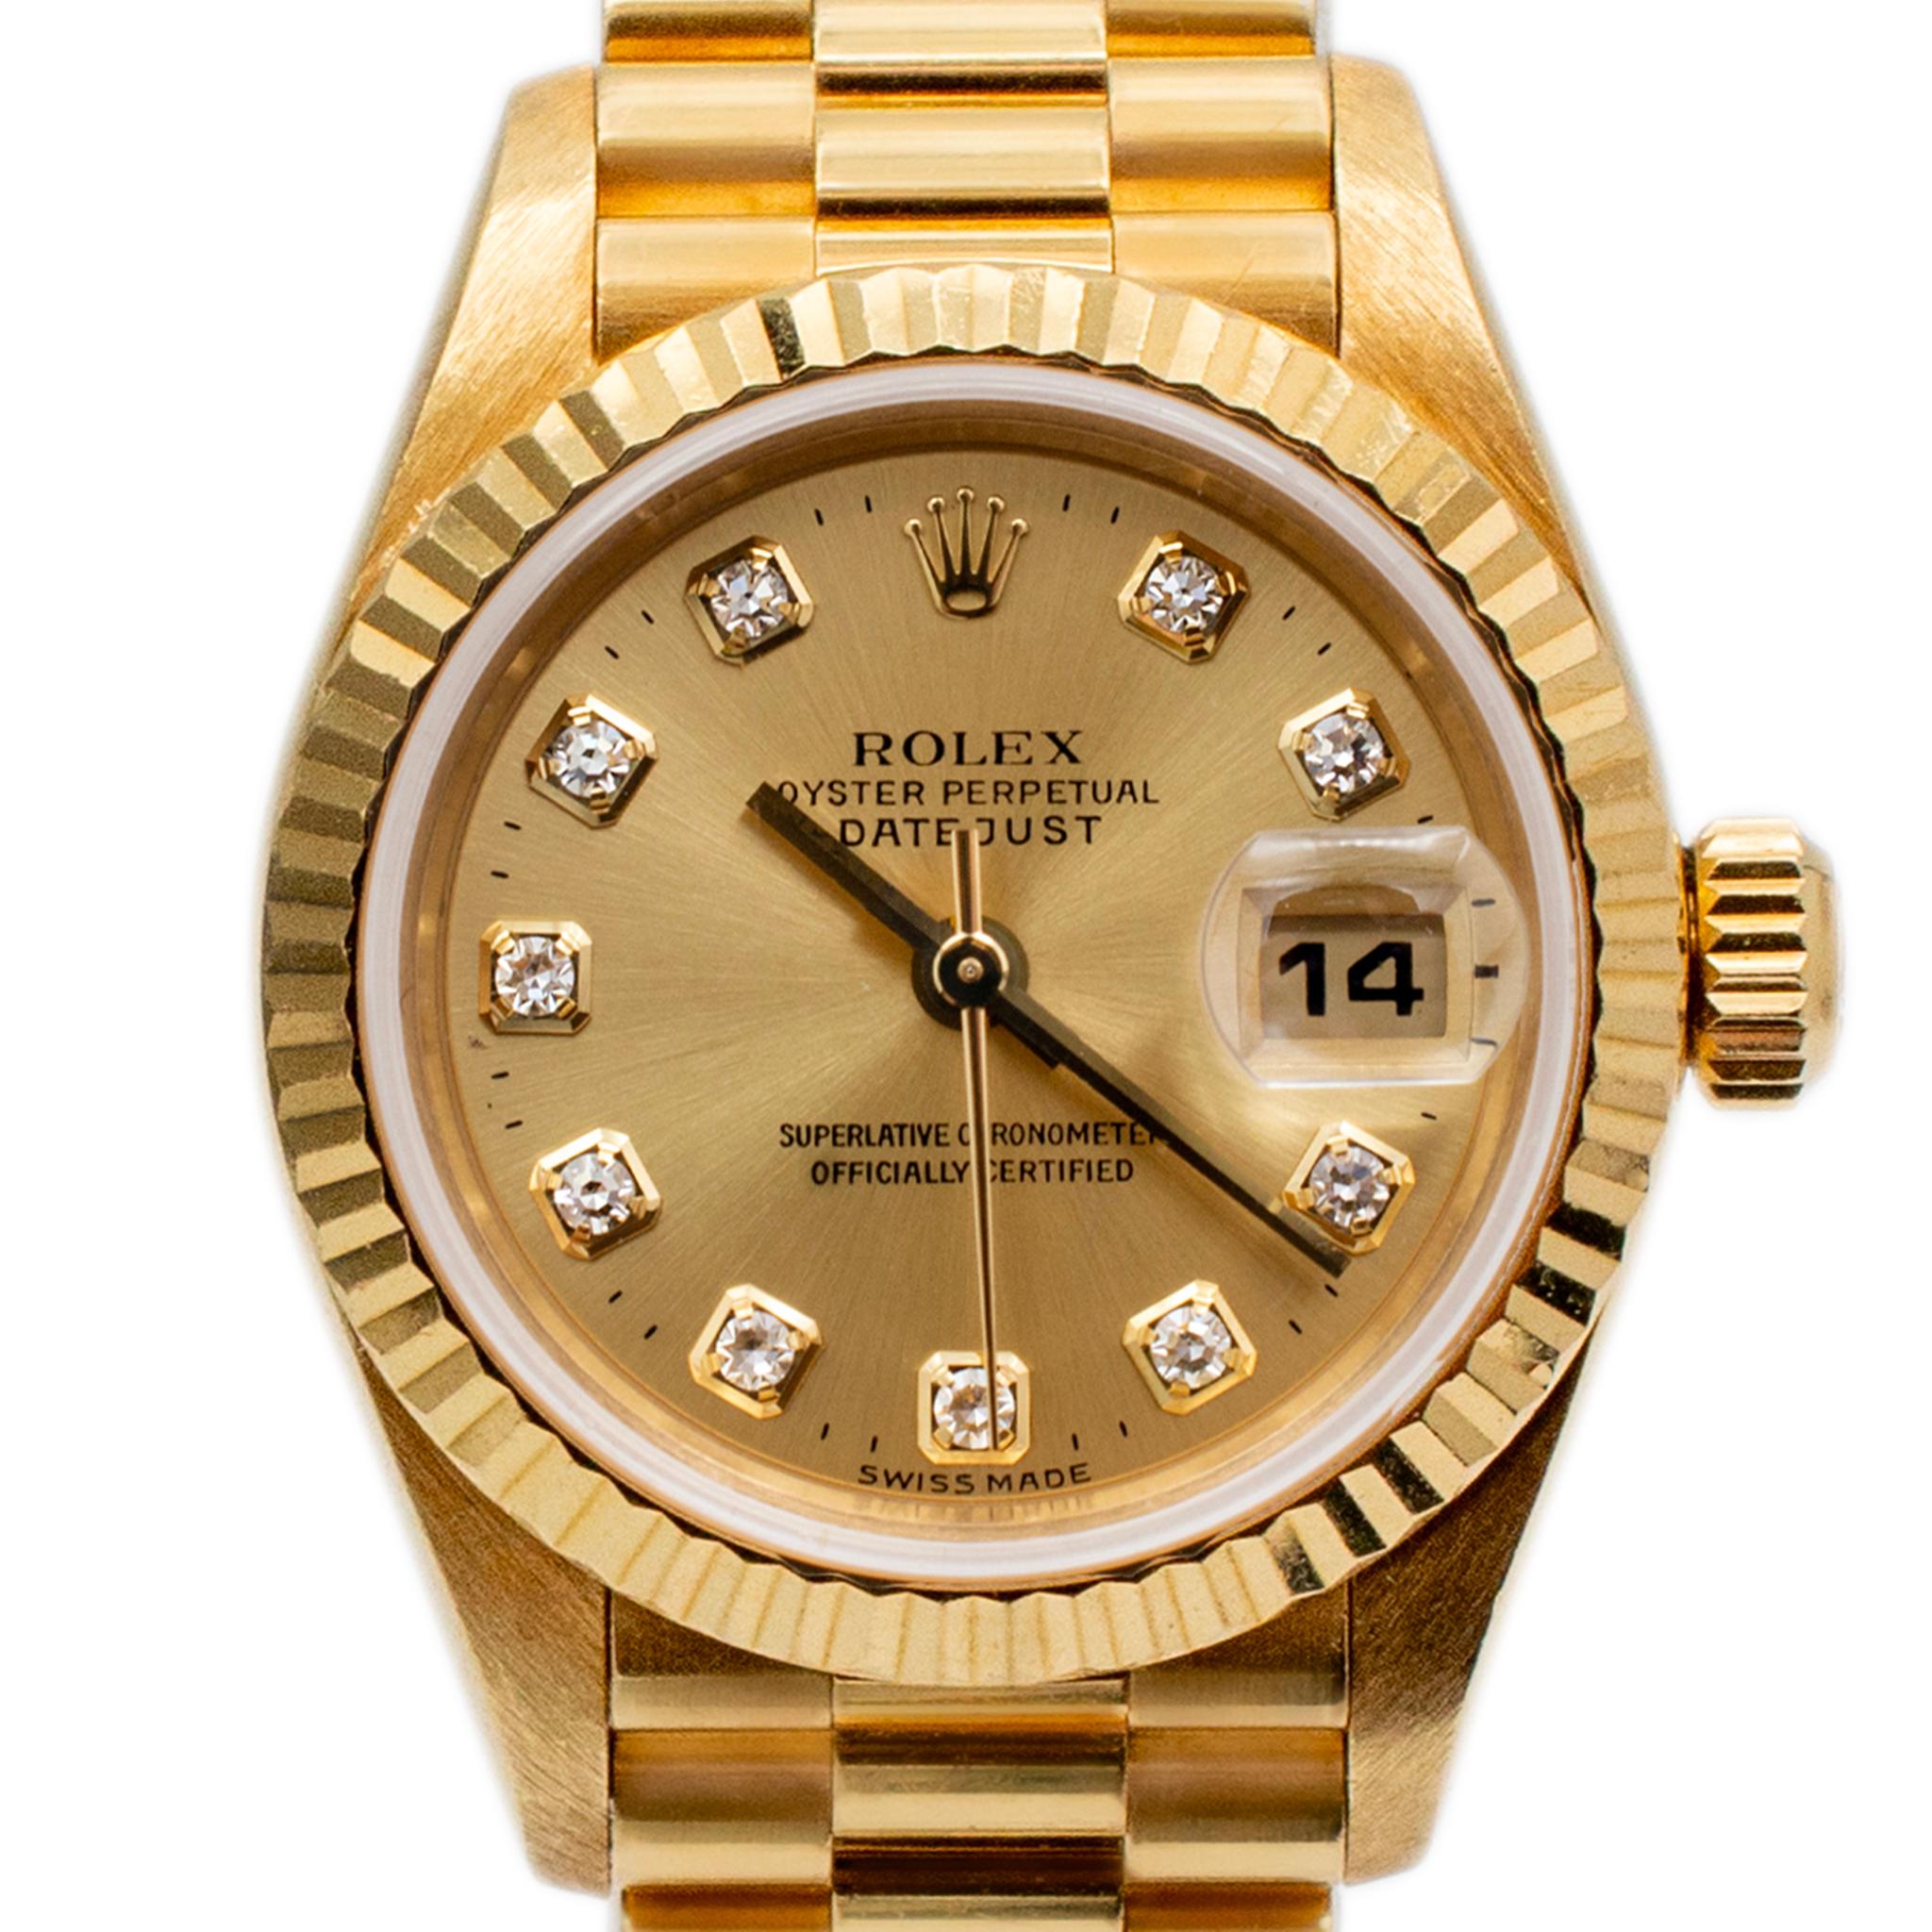 Brand: Rolex

Gender: Ladies

Metal Type: 18K Yellow Gold

Diameter: 26.00 mm

Weight:  73.74 grams

Ladies 18K yellow gold, diamond ROLEX Swiss-made watch with original box and papers. The metal was tested and determined to be 18K yellow gold. The